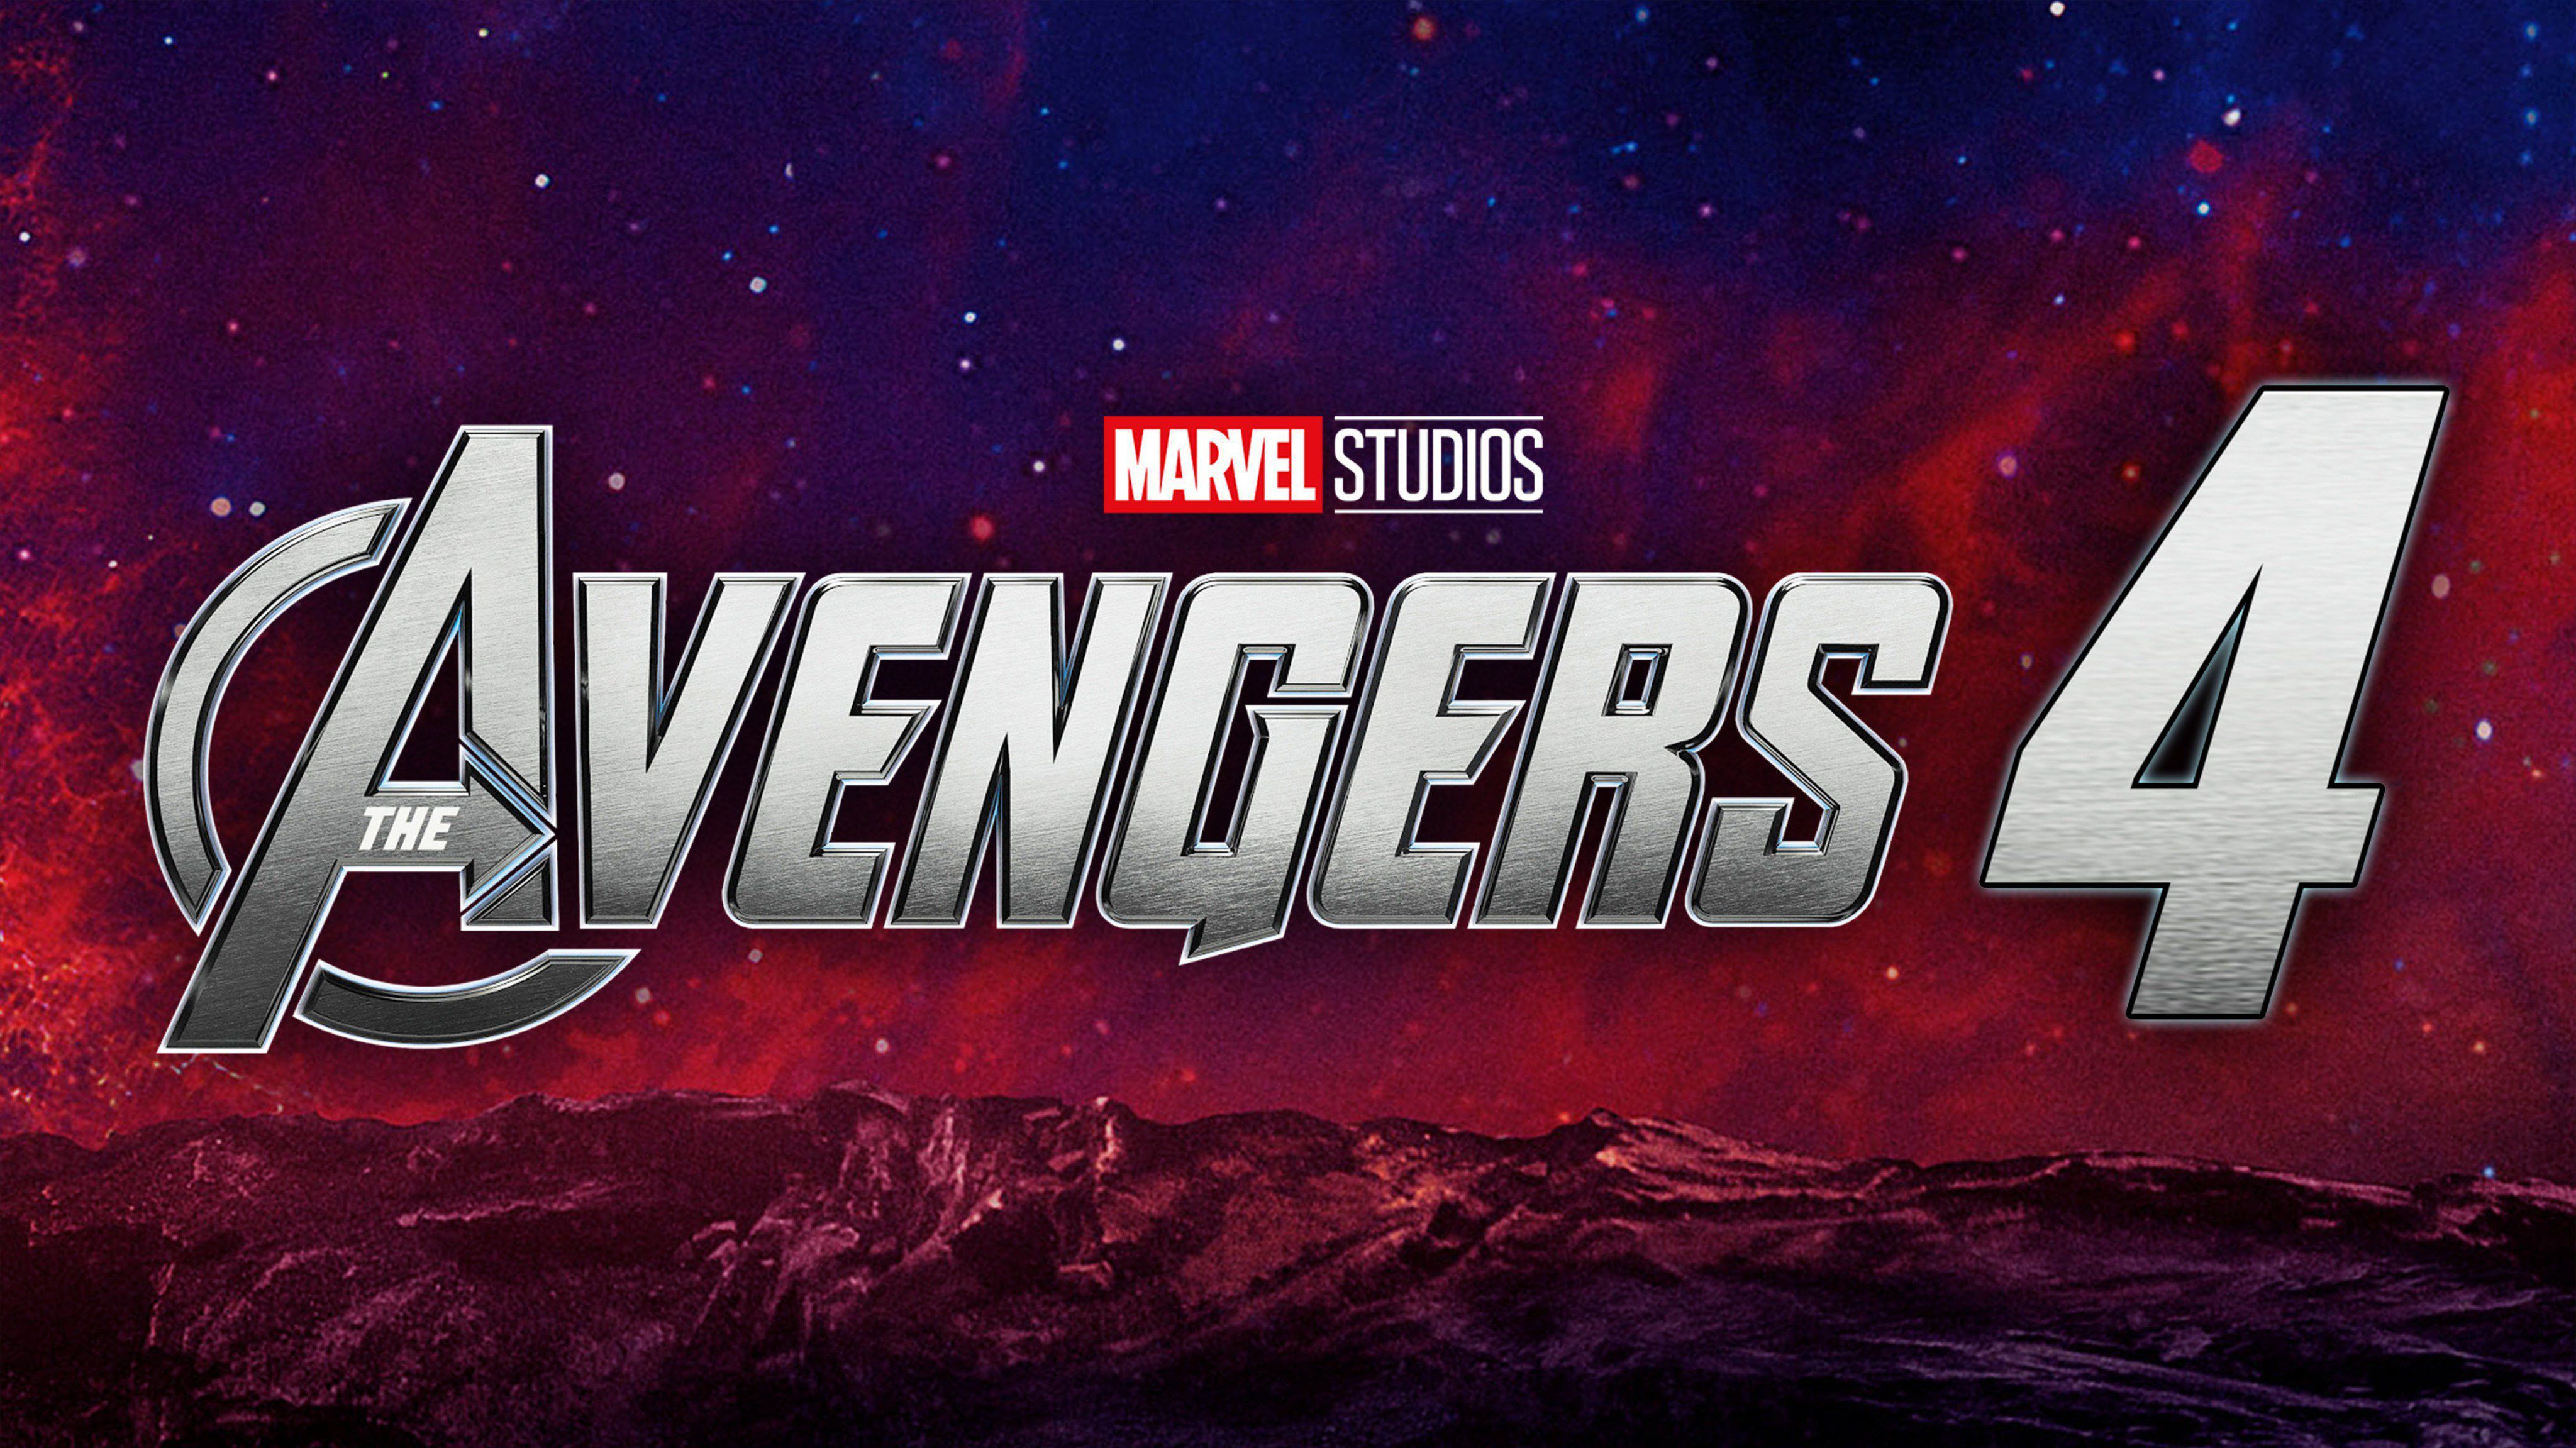 4k Marvel Studios Avengers Endgame Wallpapers iPhone Android and